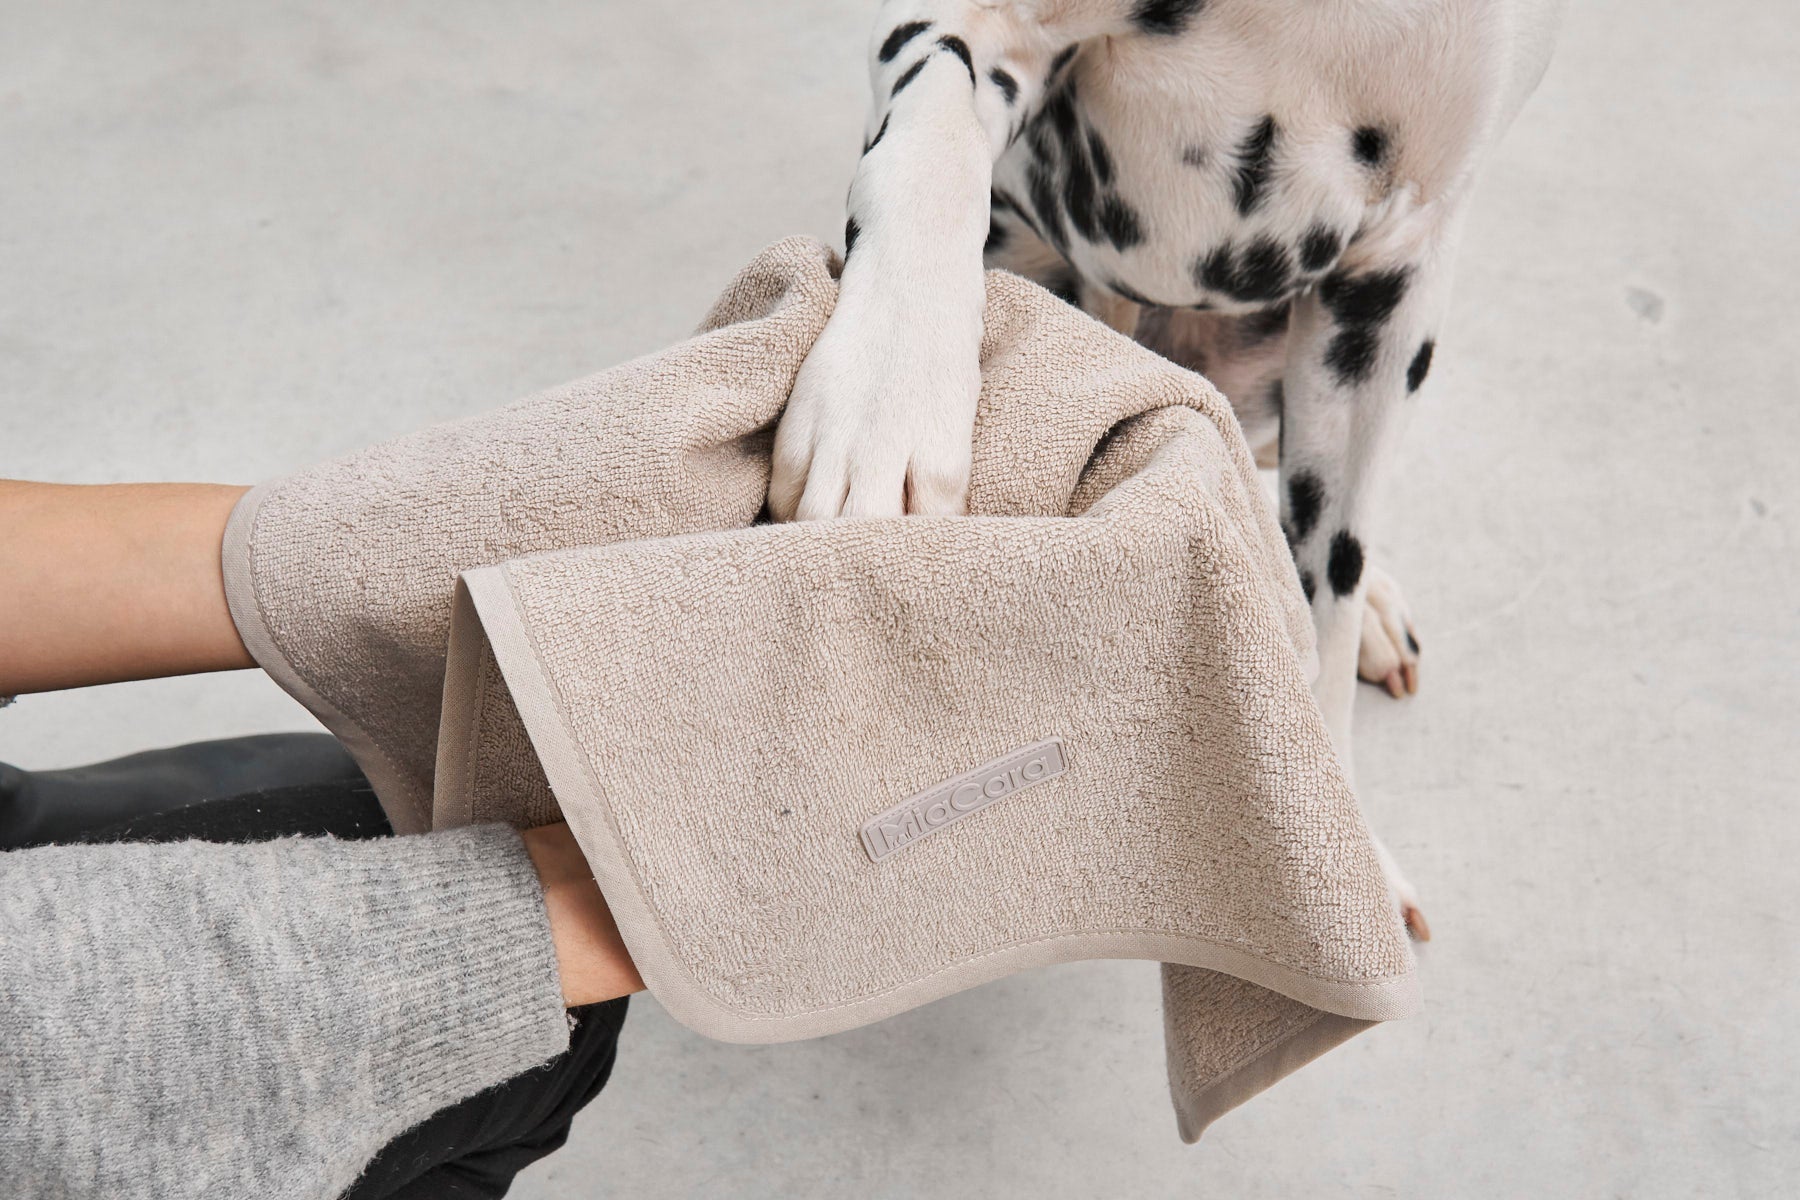 Versatile Secco Dog Towel for after-bath or rain